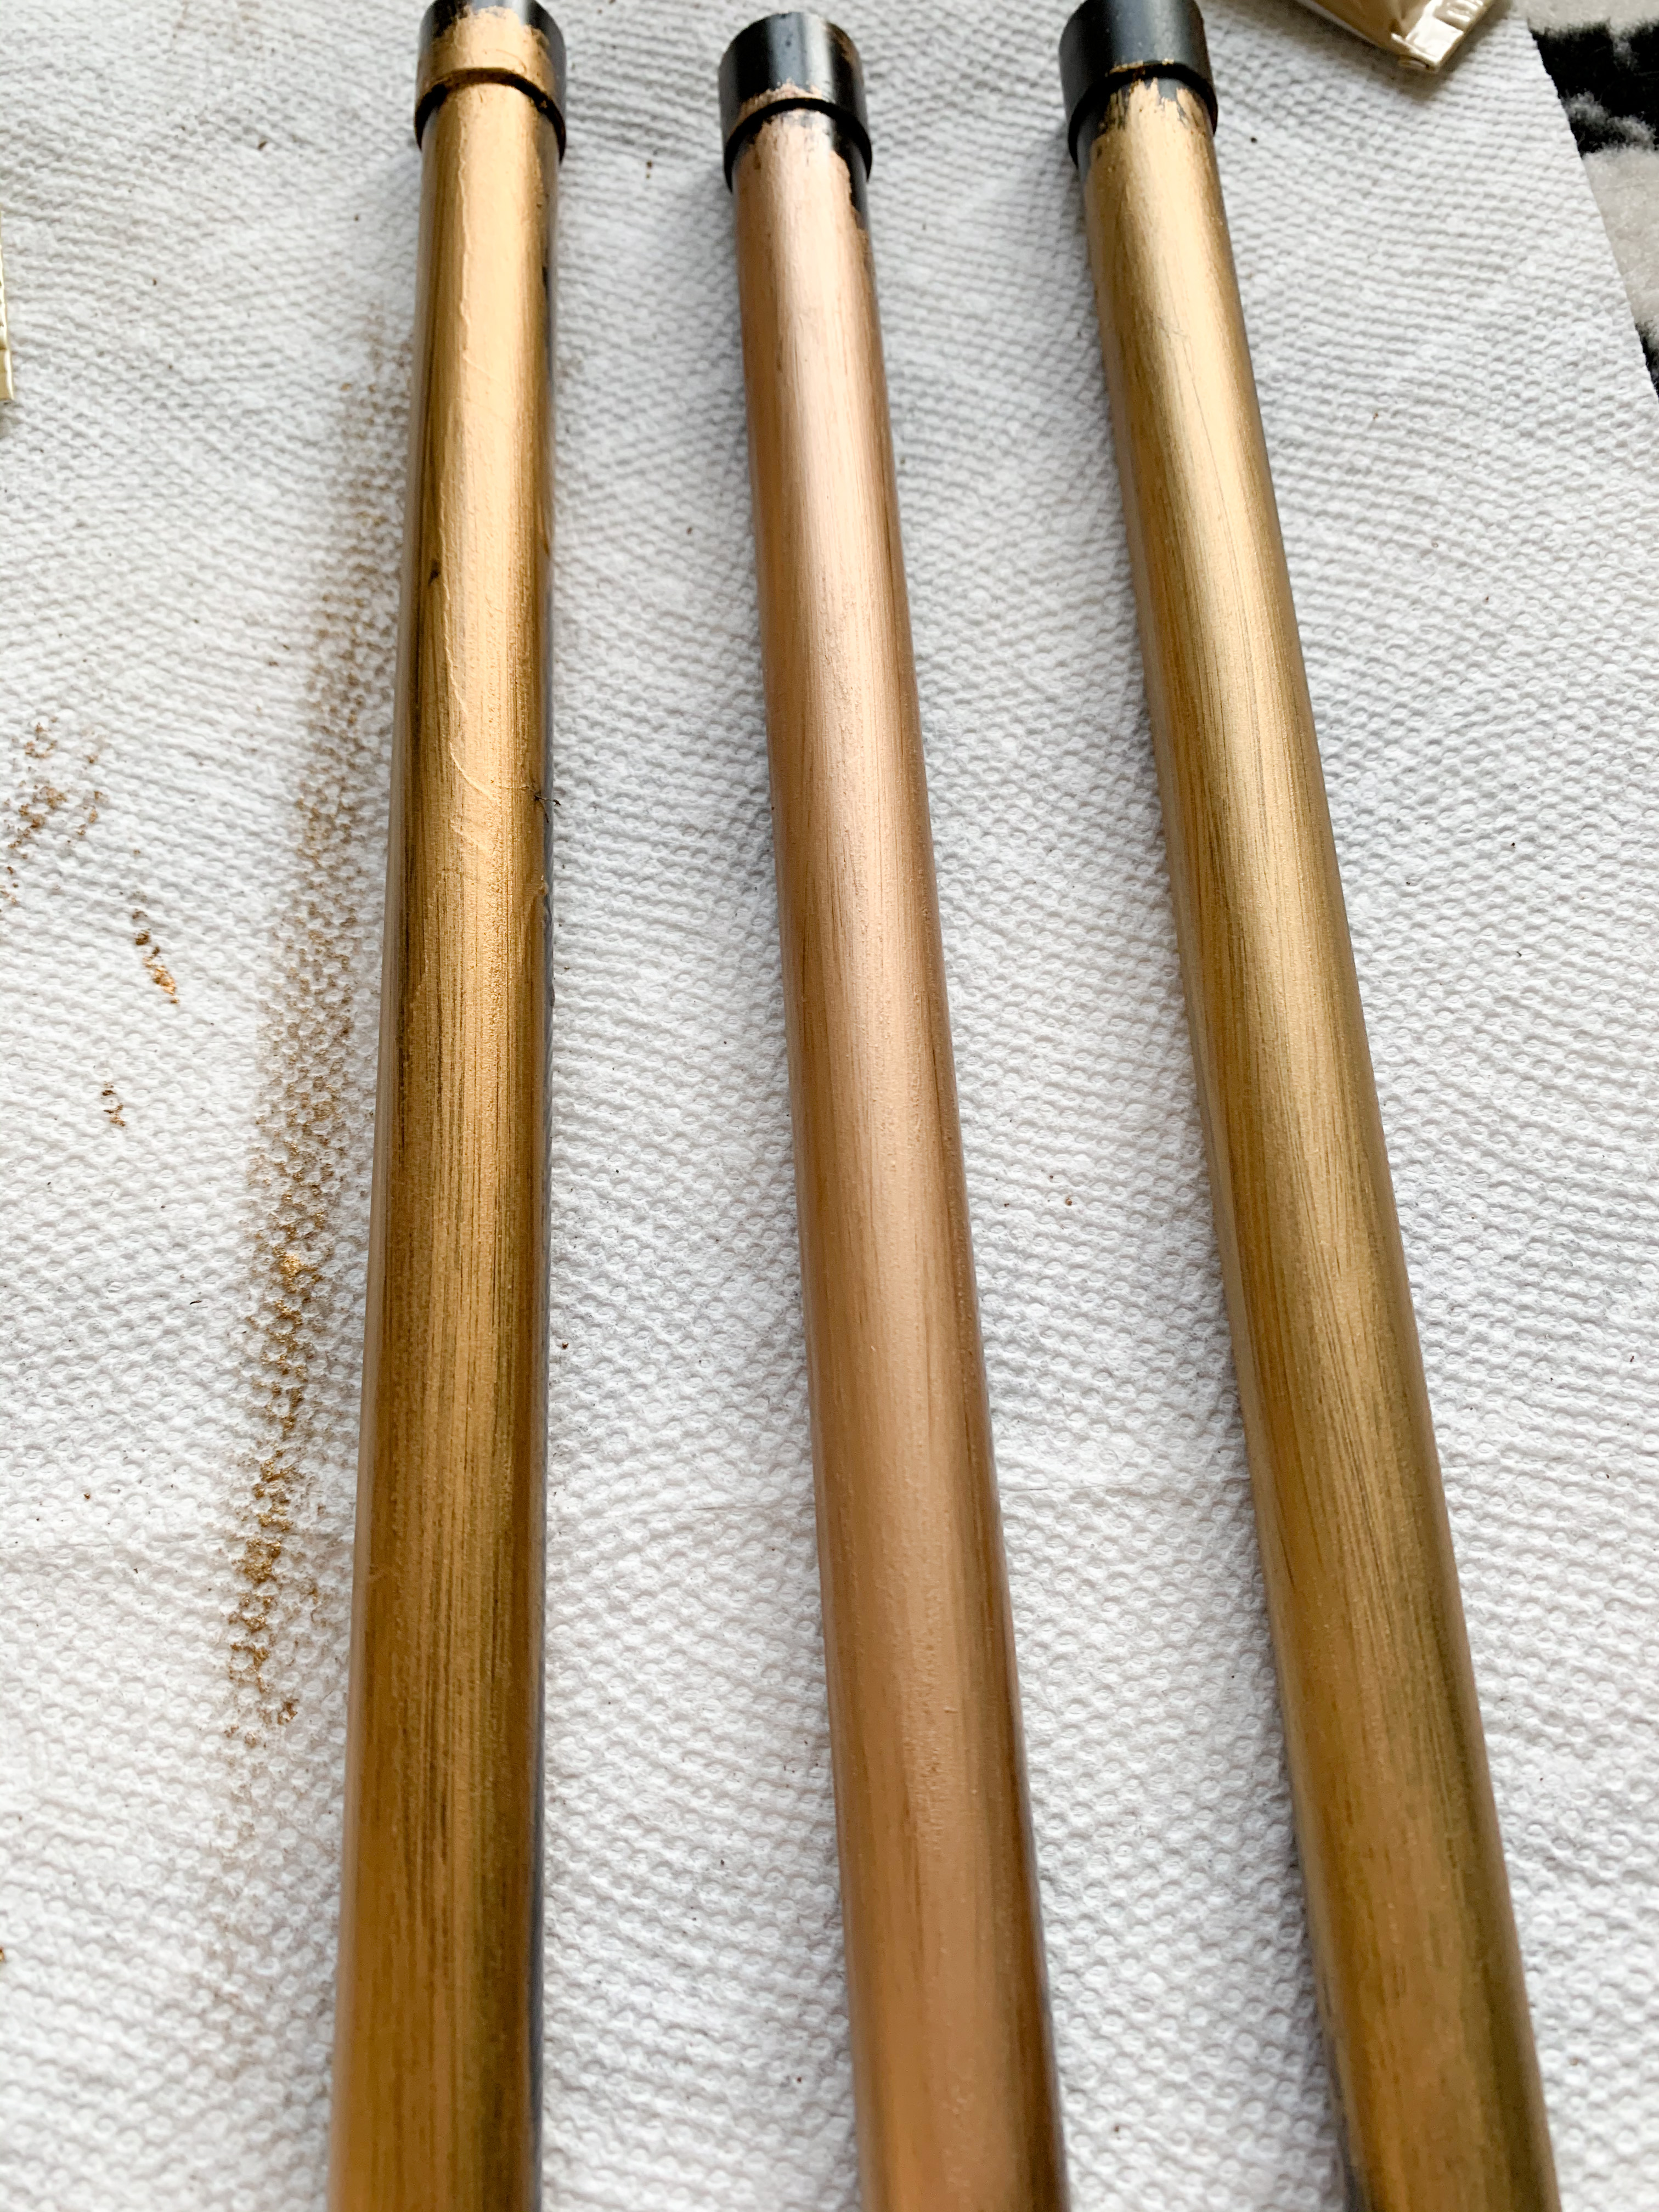 Copper pipes with different rub-n-buff colors.